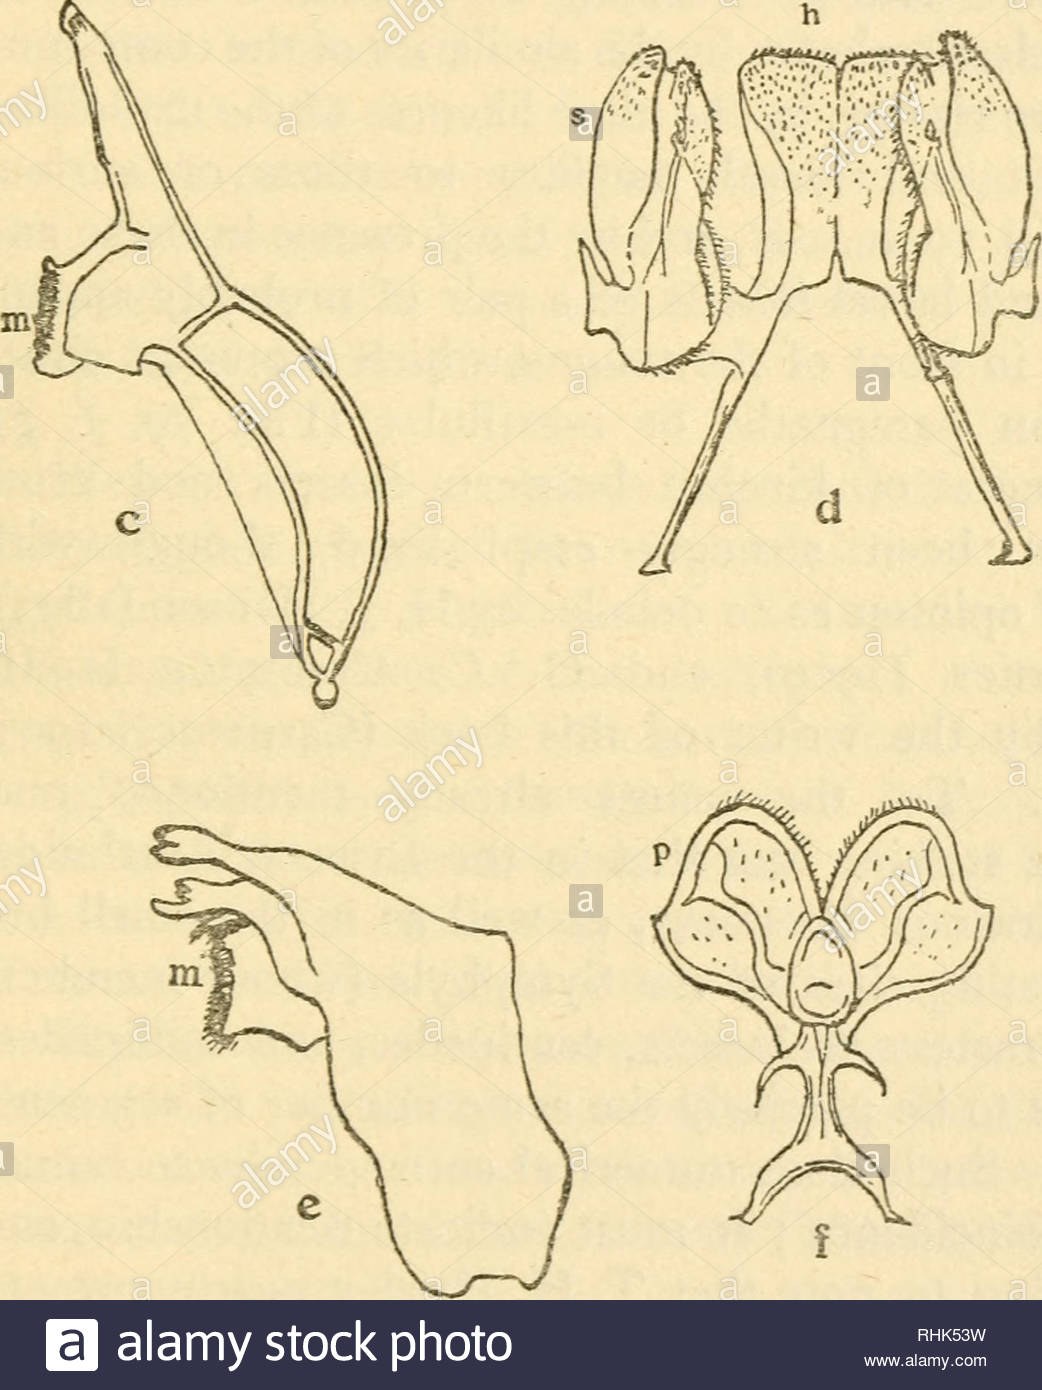 the biology of insects insects biology fig 79a mandible m molar area h hypopharynx ji and superlinguae of mayfly larva heptagenia x 12 after vayssiere ann sci nat zool xiii 18s2 c mandible d hypopharynx and superlinguae the left superlingua displaced of bristle tail petrobius x 30 e mandible hypopharynx and paragnaths p and g maxil lula of isopod crustacean ligia x 12 after g o sars crustacea of norzmy ij 1899 please note that these images are extracted from scanned page images that may have been digitally enhanced for readabil RHK53W